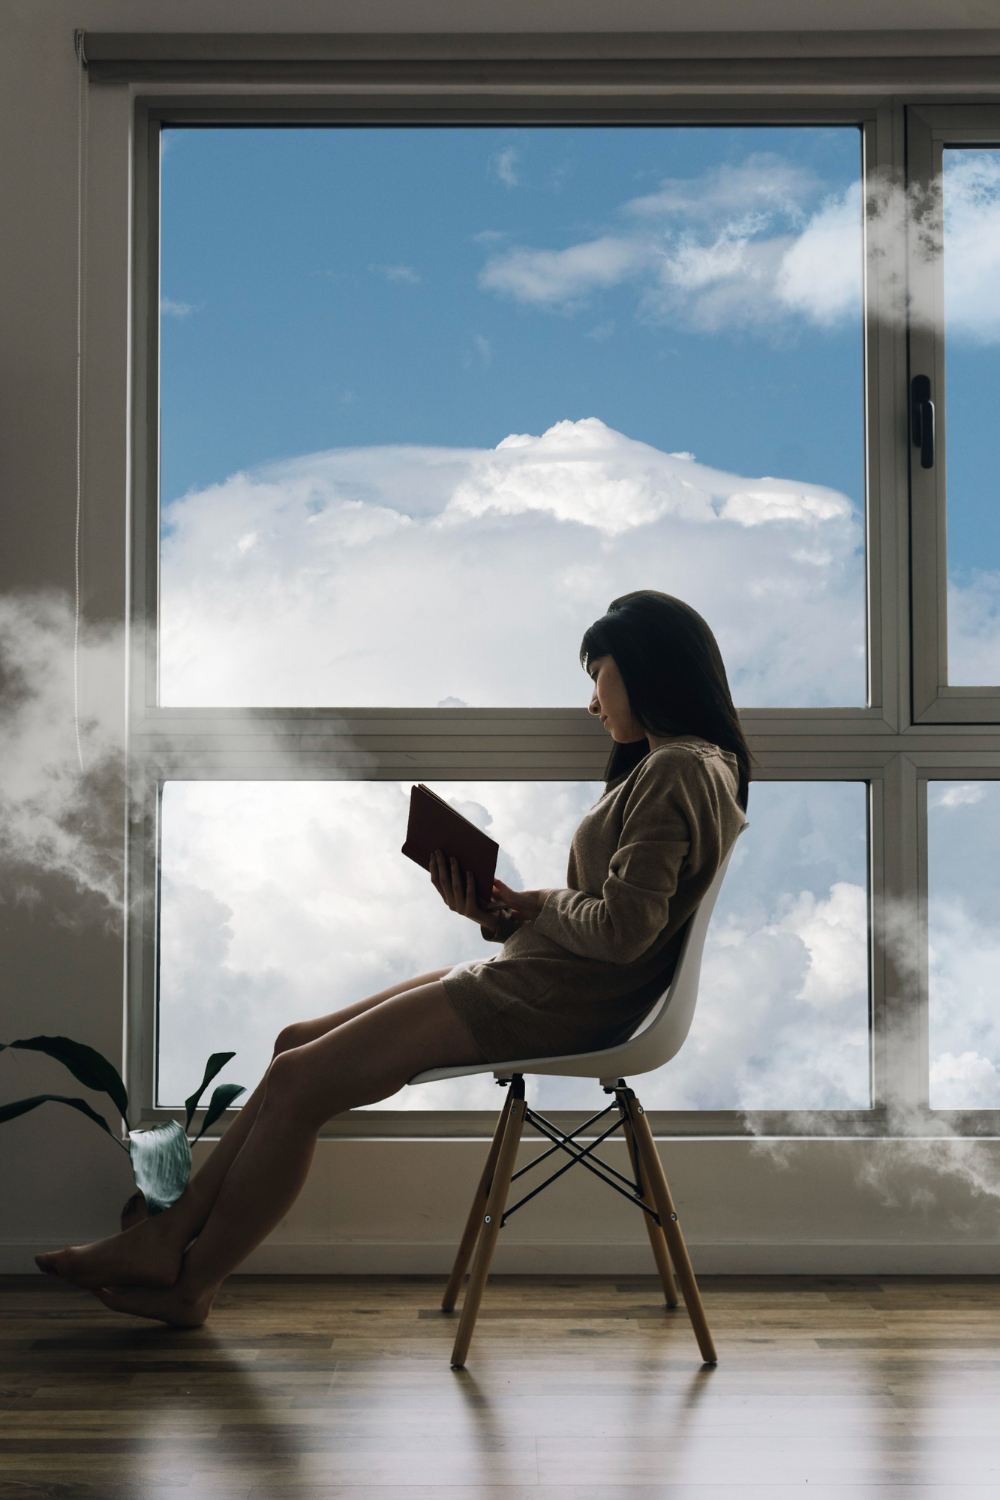 Artistic shot of woman reading indoors by a large window and clouds outside